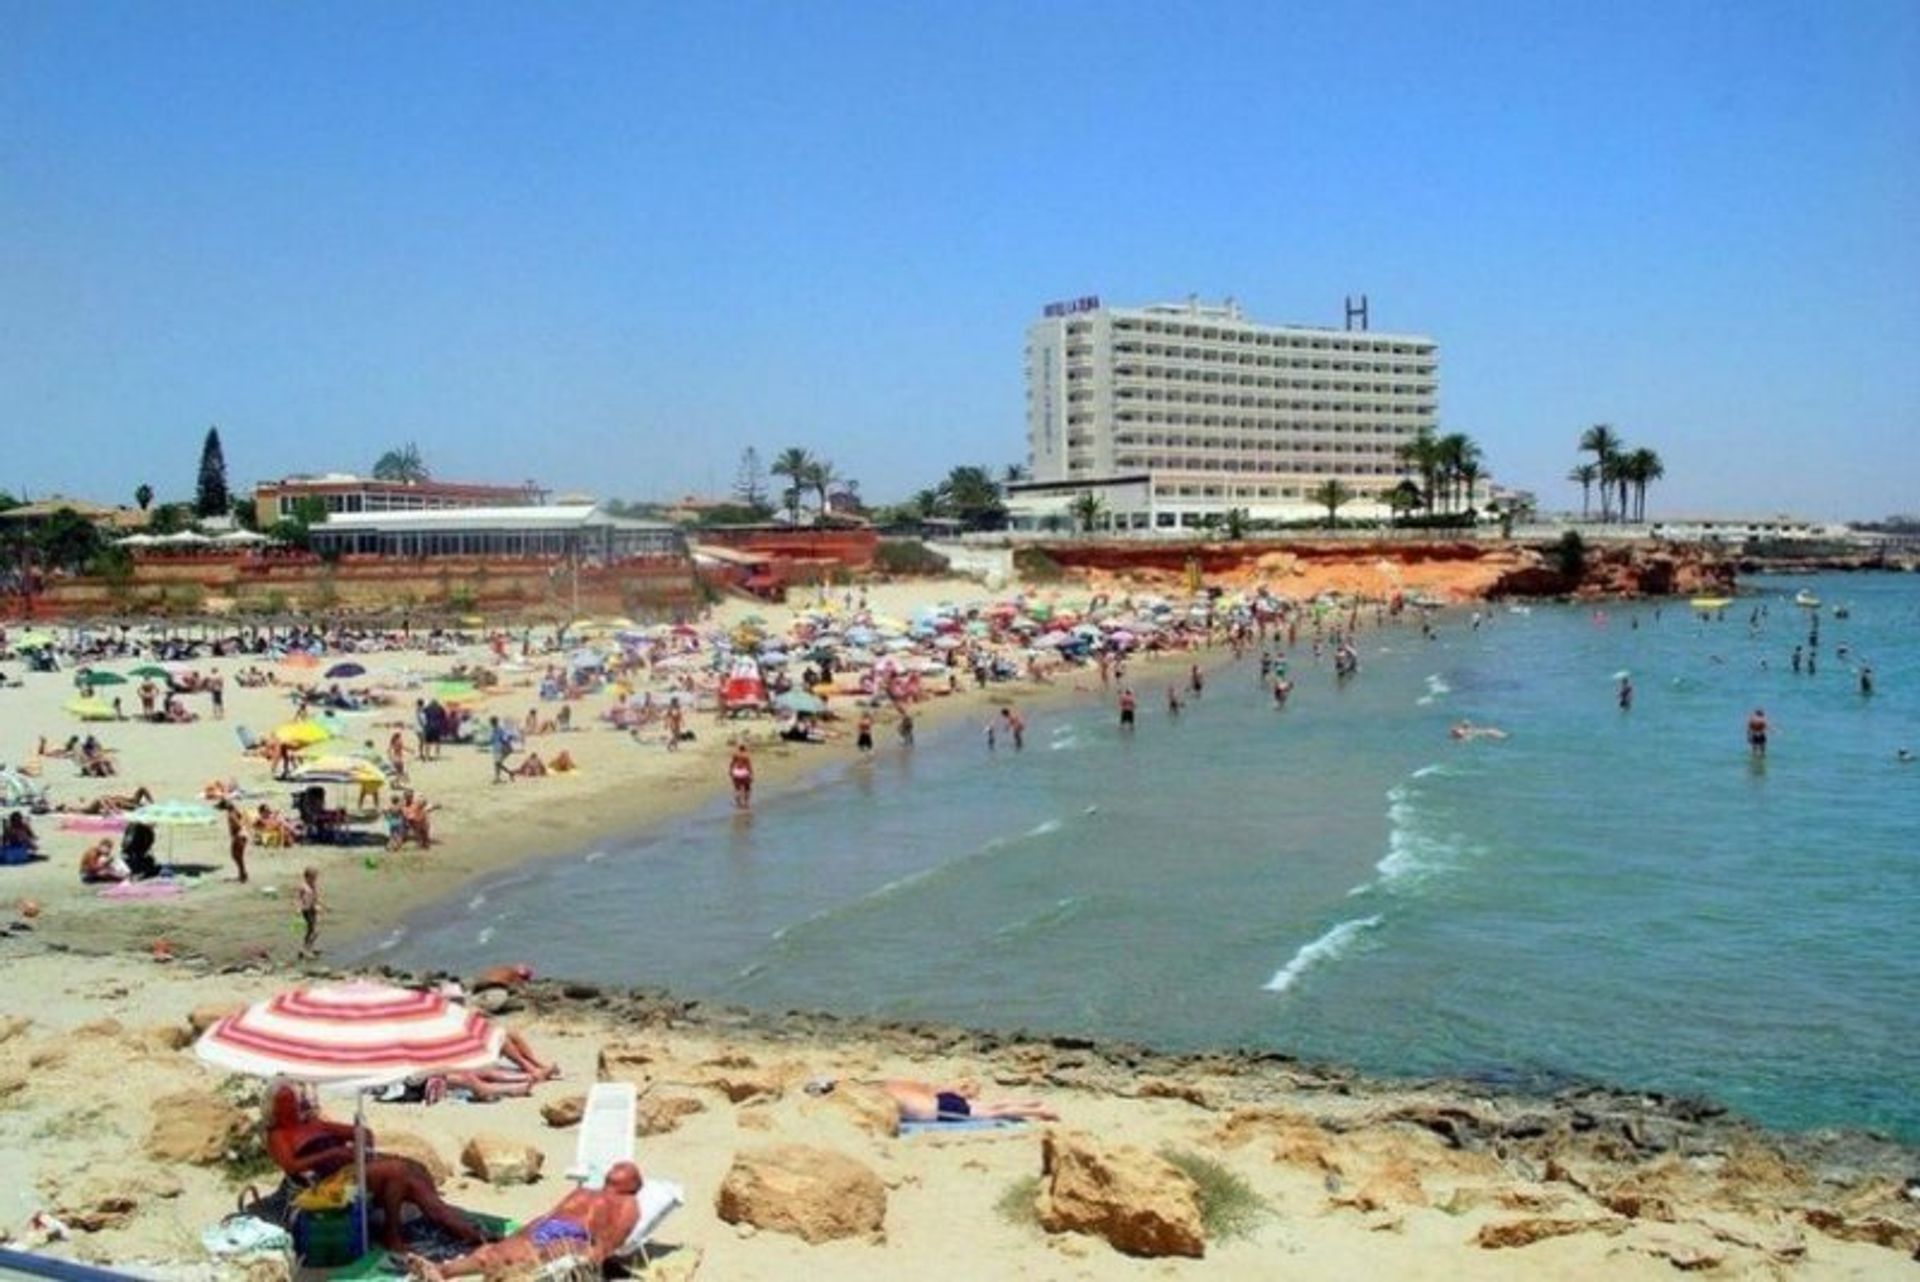 People watch on Orihuela's La Zenia beach, just a stone's throw away from San Miguel